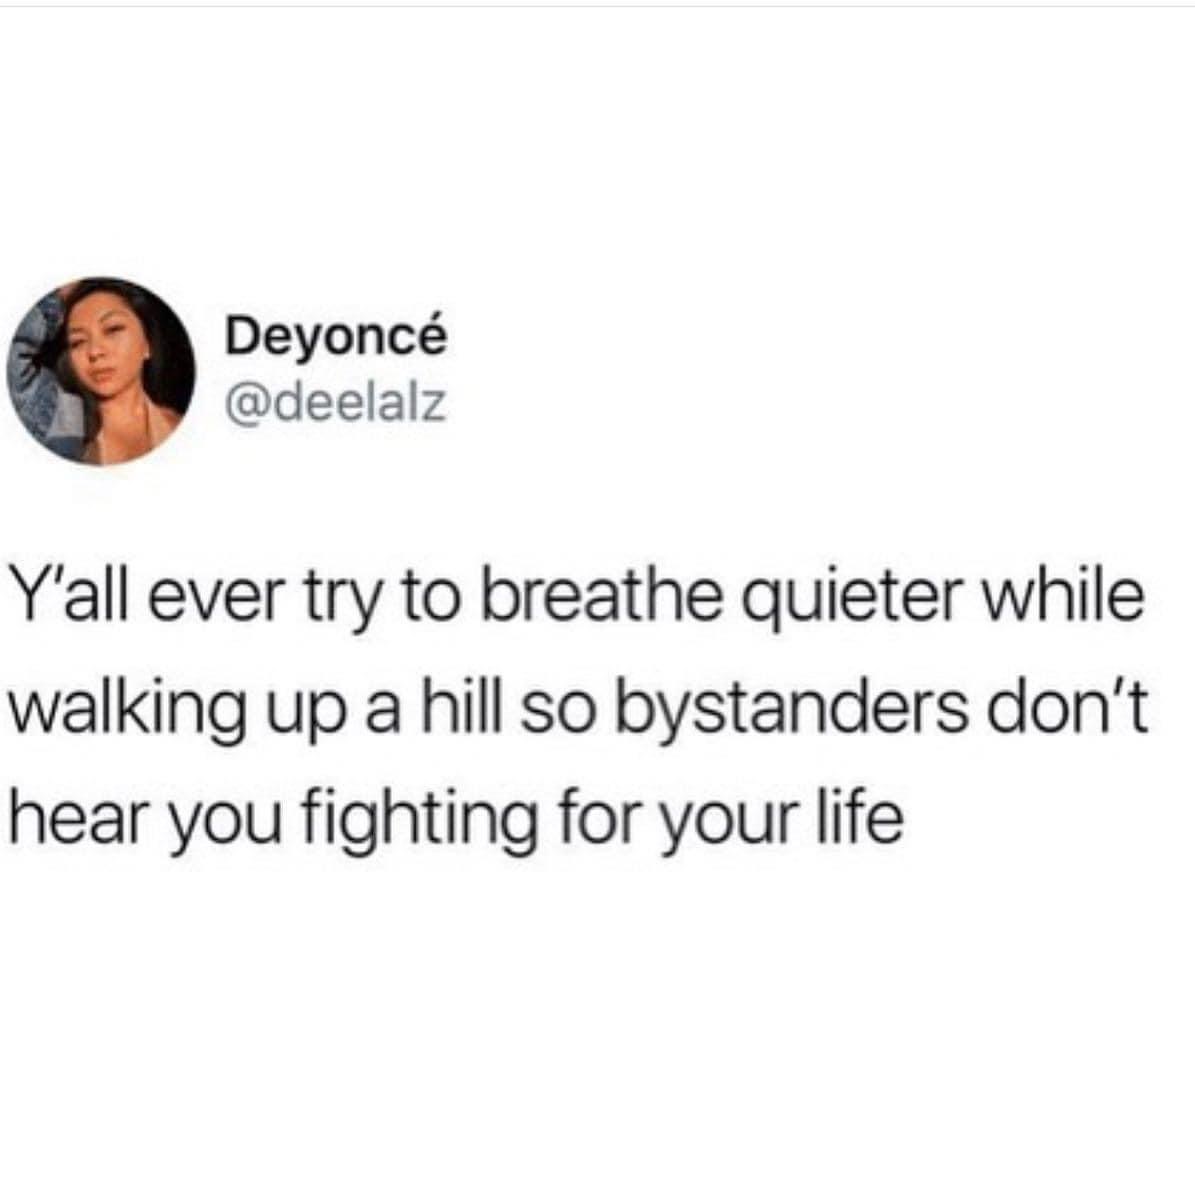 gopro night out meme - Deyonc Y'all ever try to breathe quieter while walking up a hill so bystanders don't hear you fighting for your life